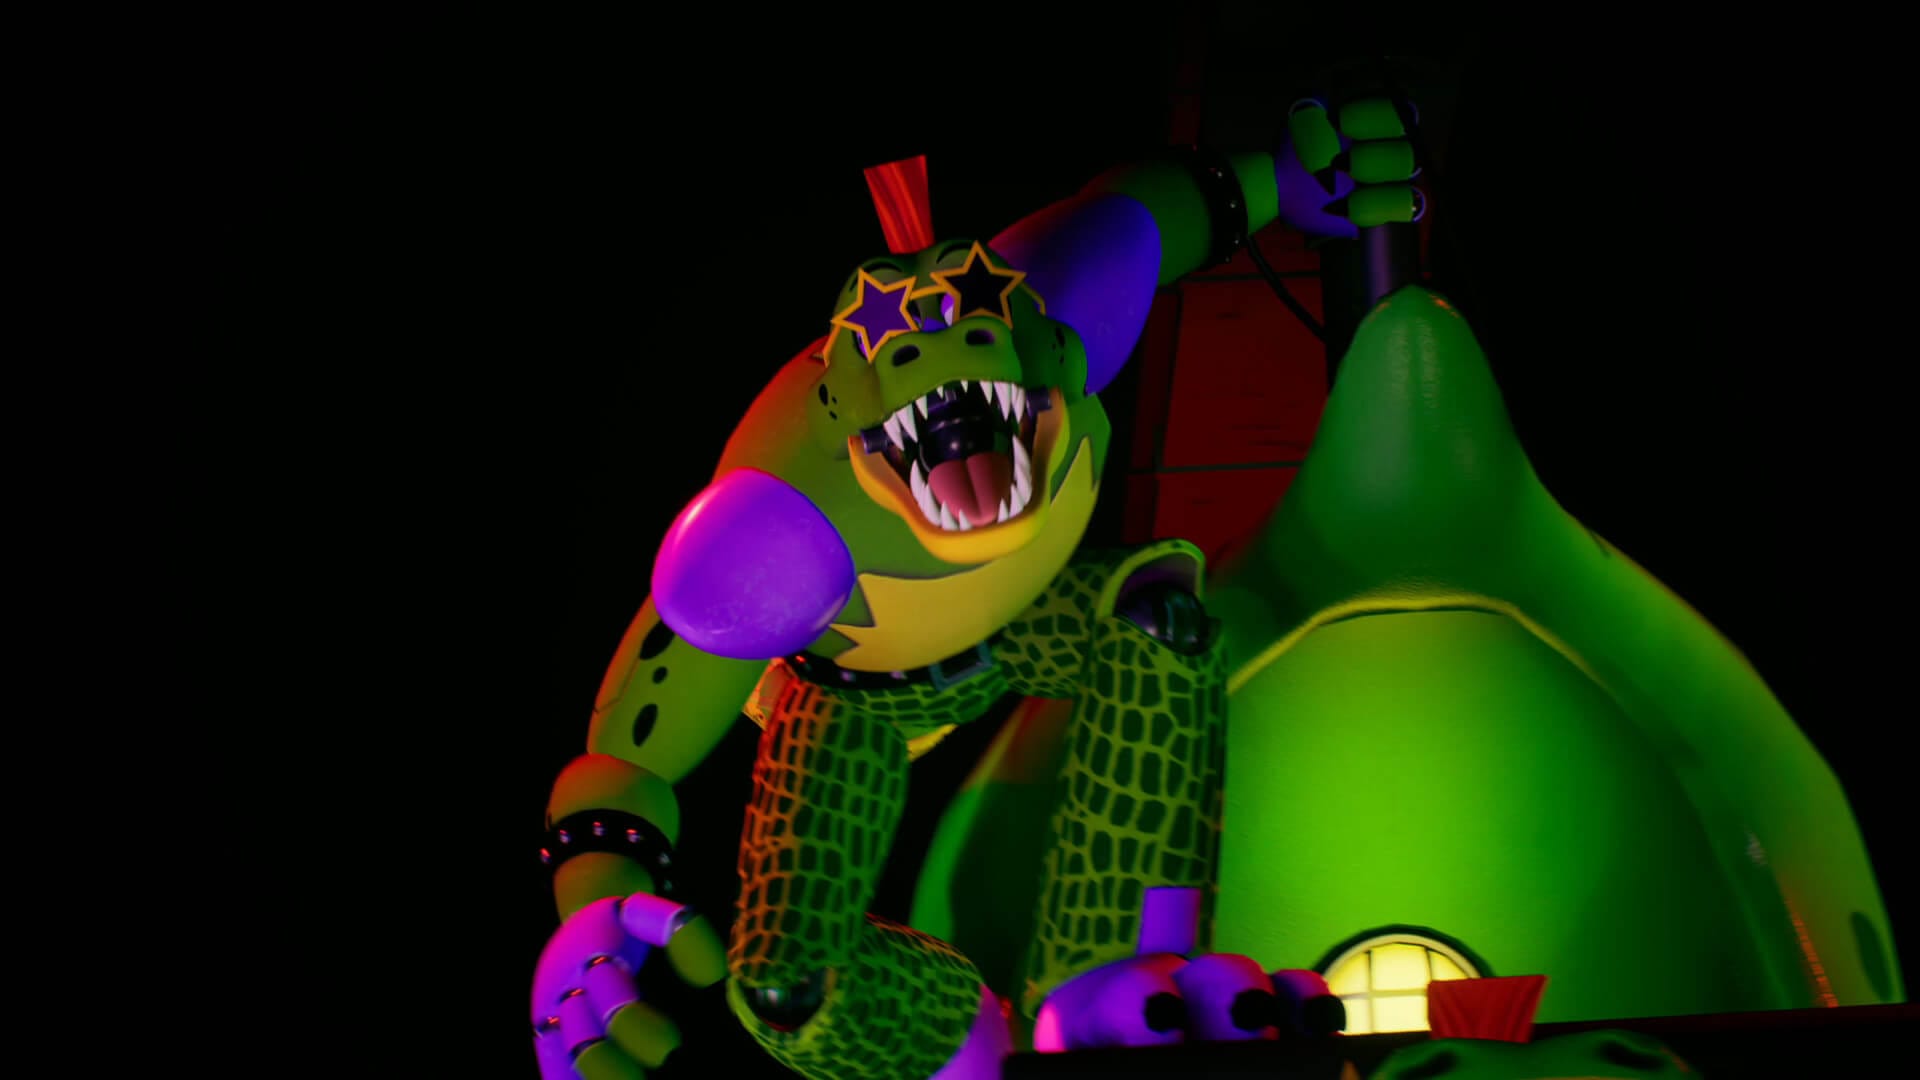 Five Nights at Freddy's movie starts filming